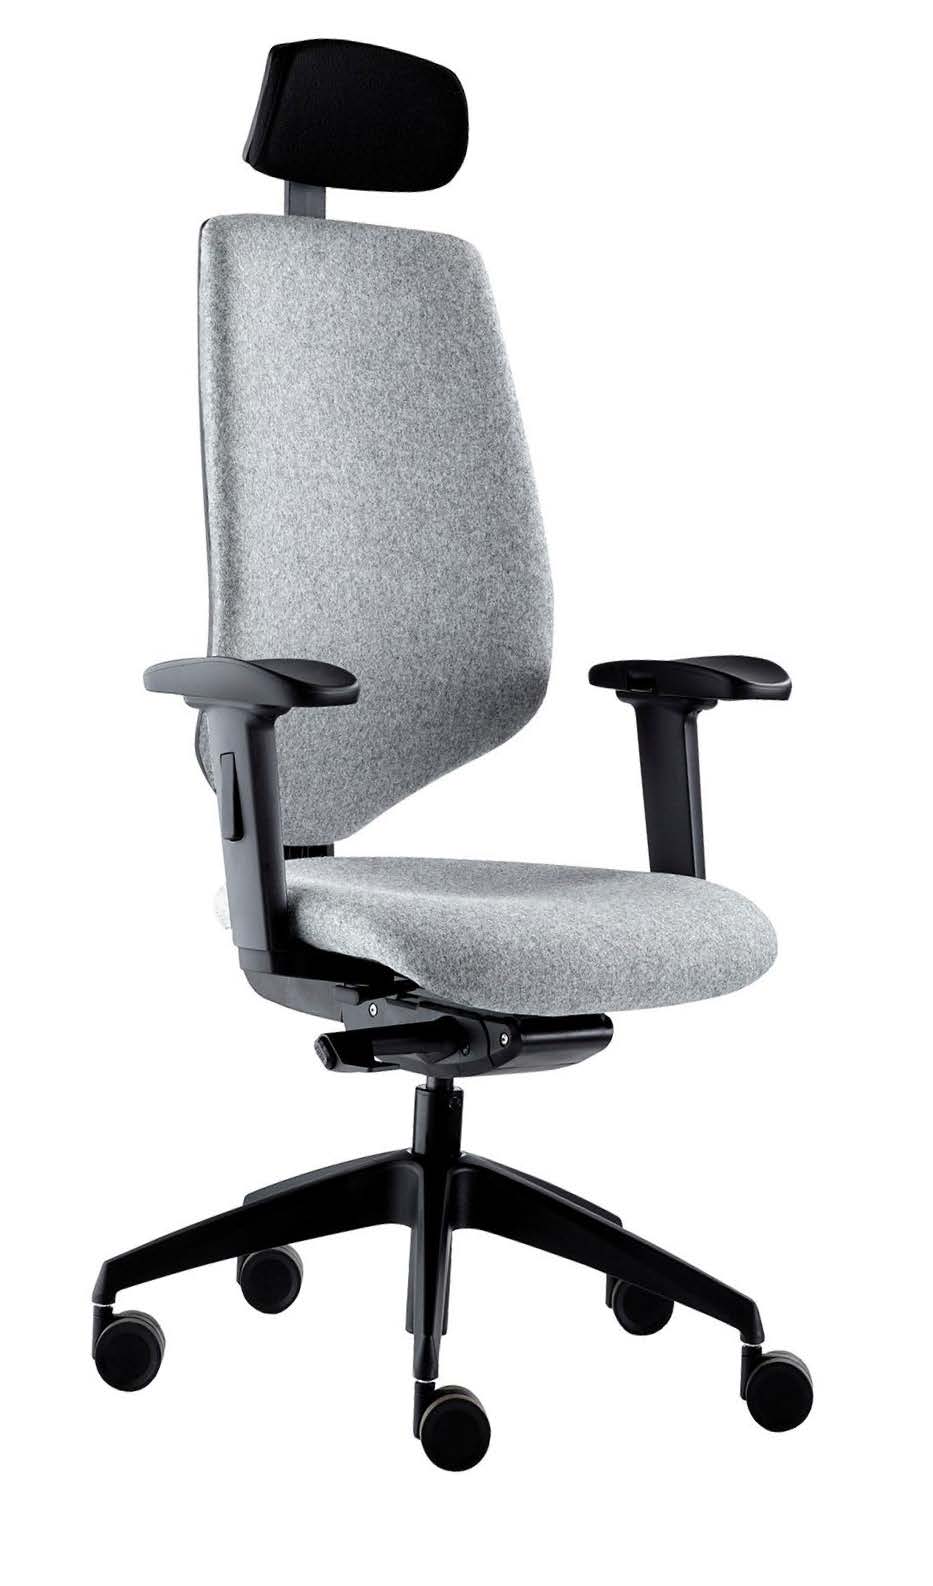 SixtySix Upholstered Chair with Mulitfunctional Arms